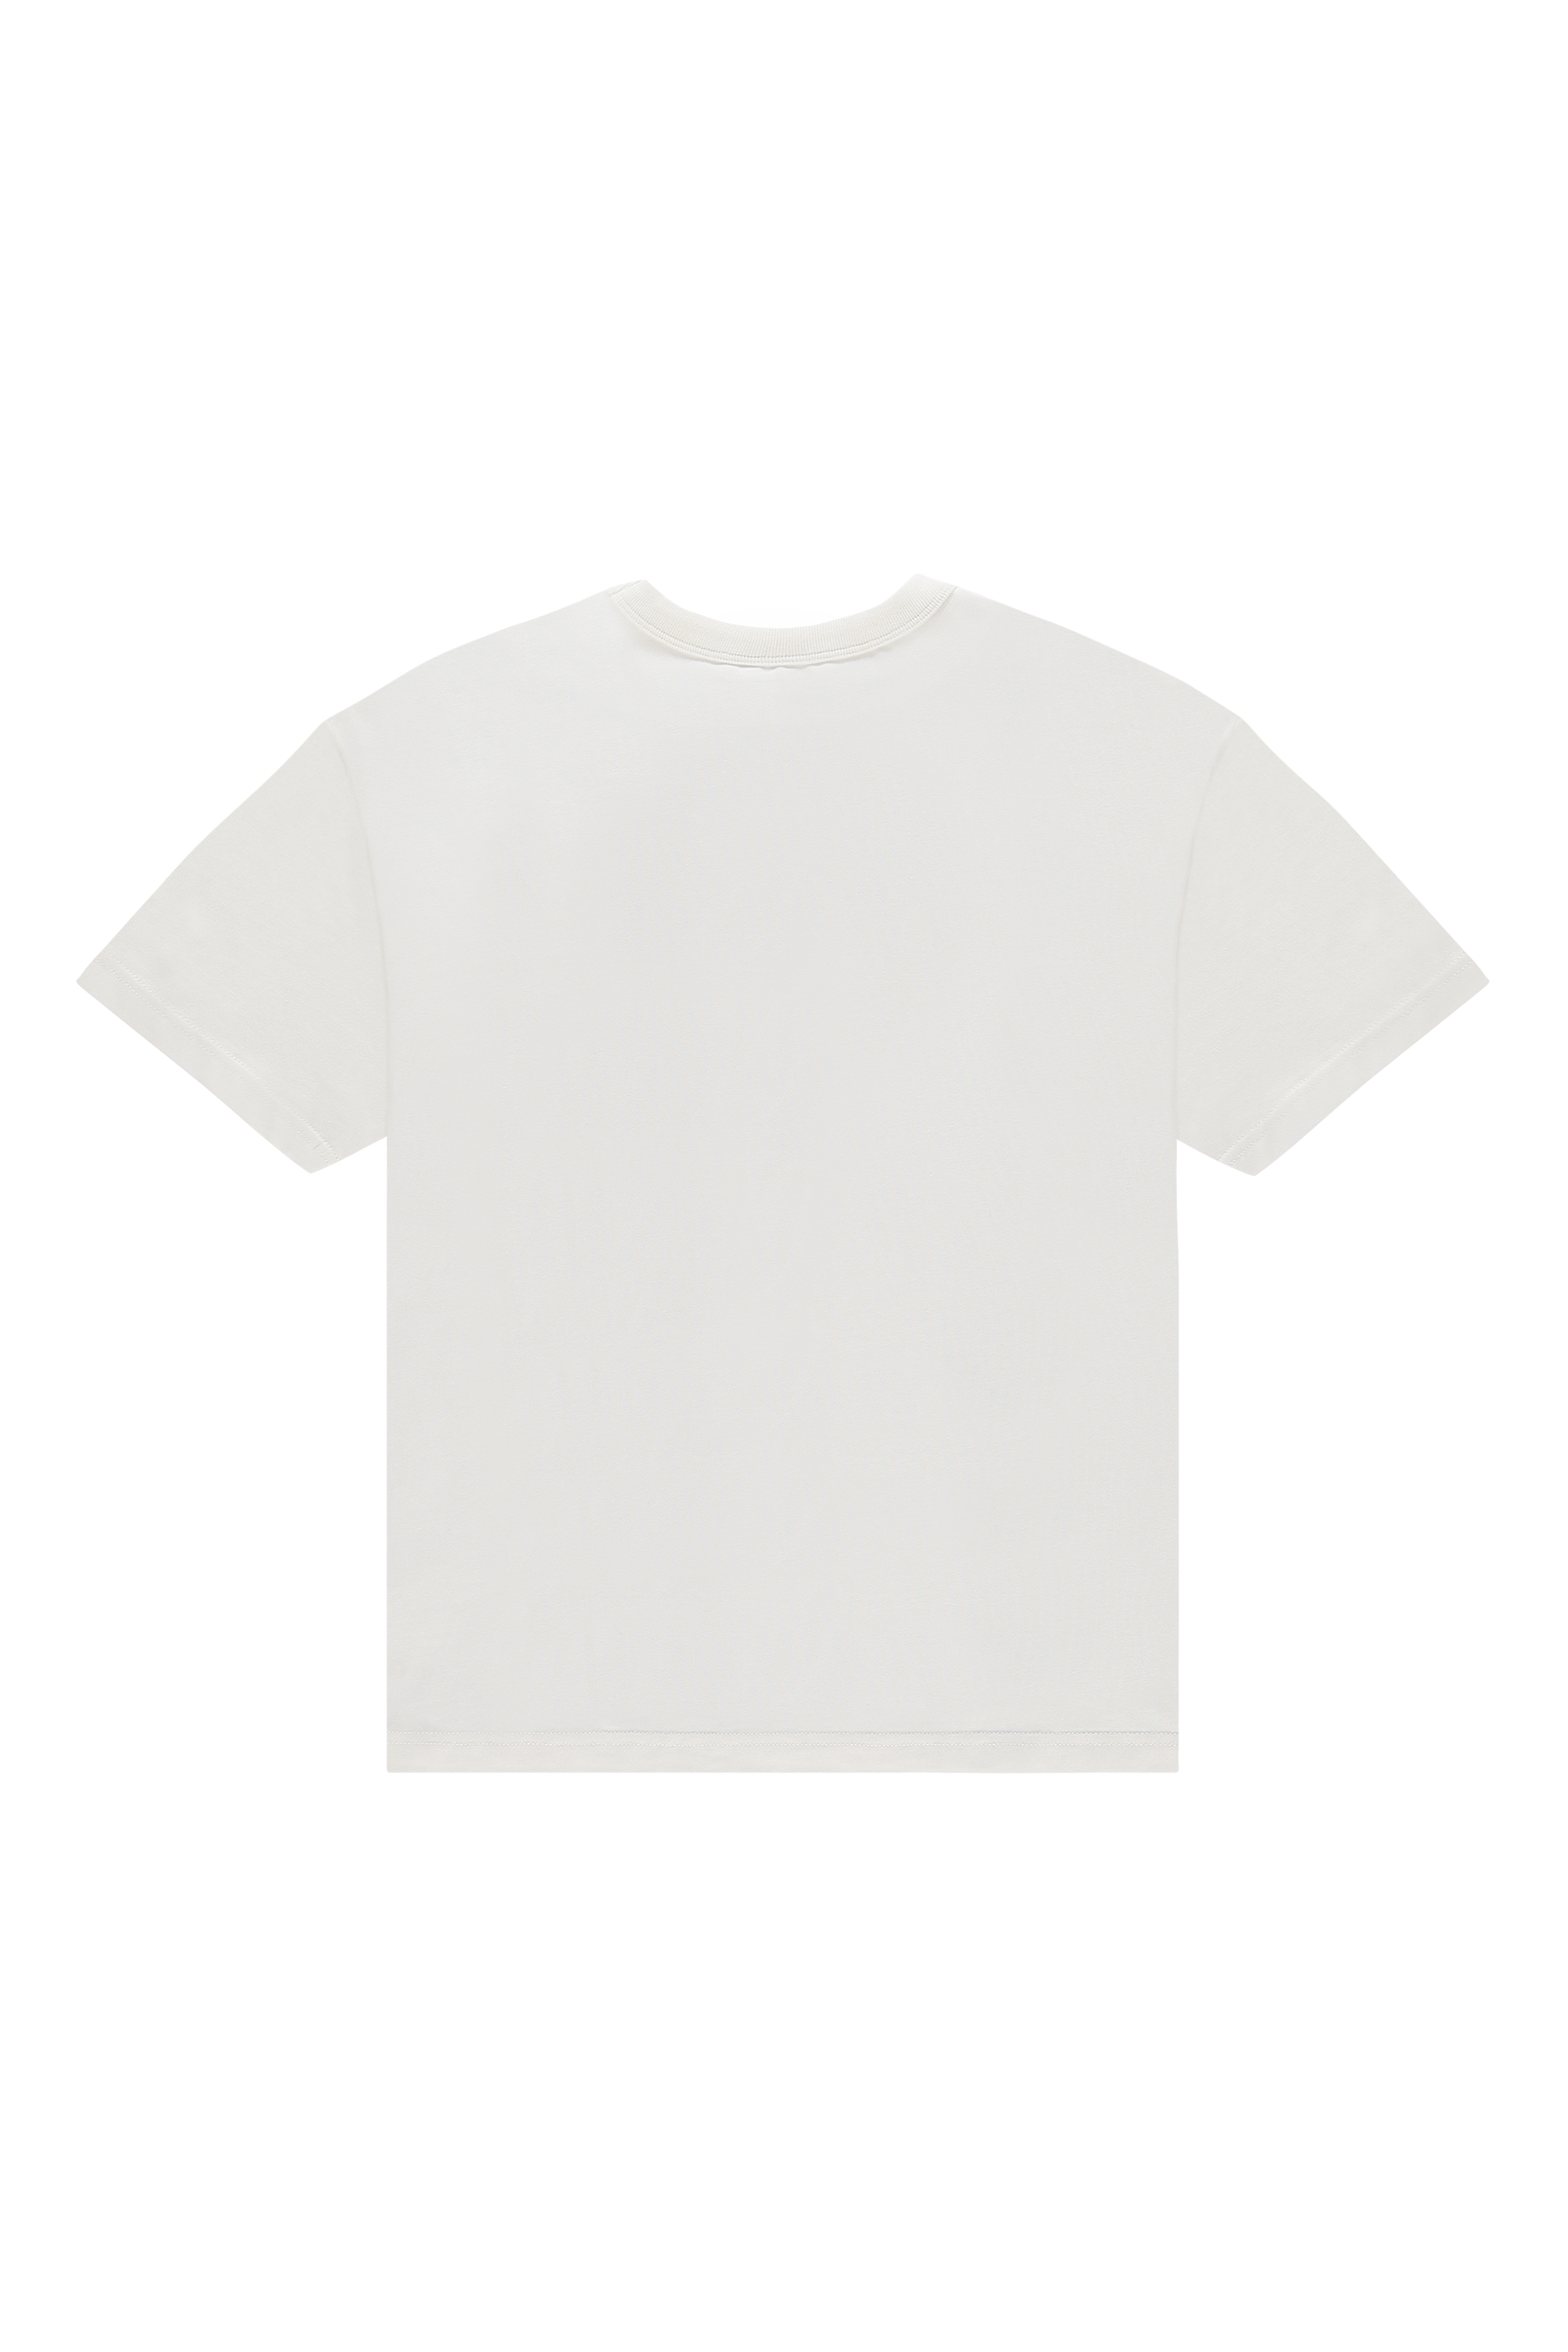 products-birdtee_ecru_back-png